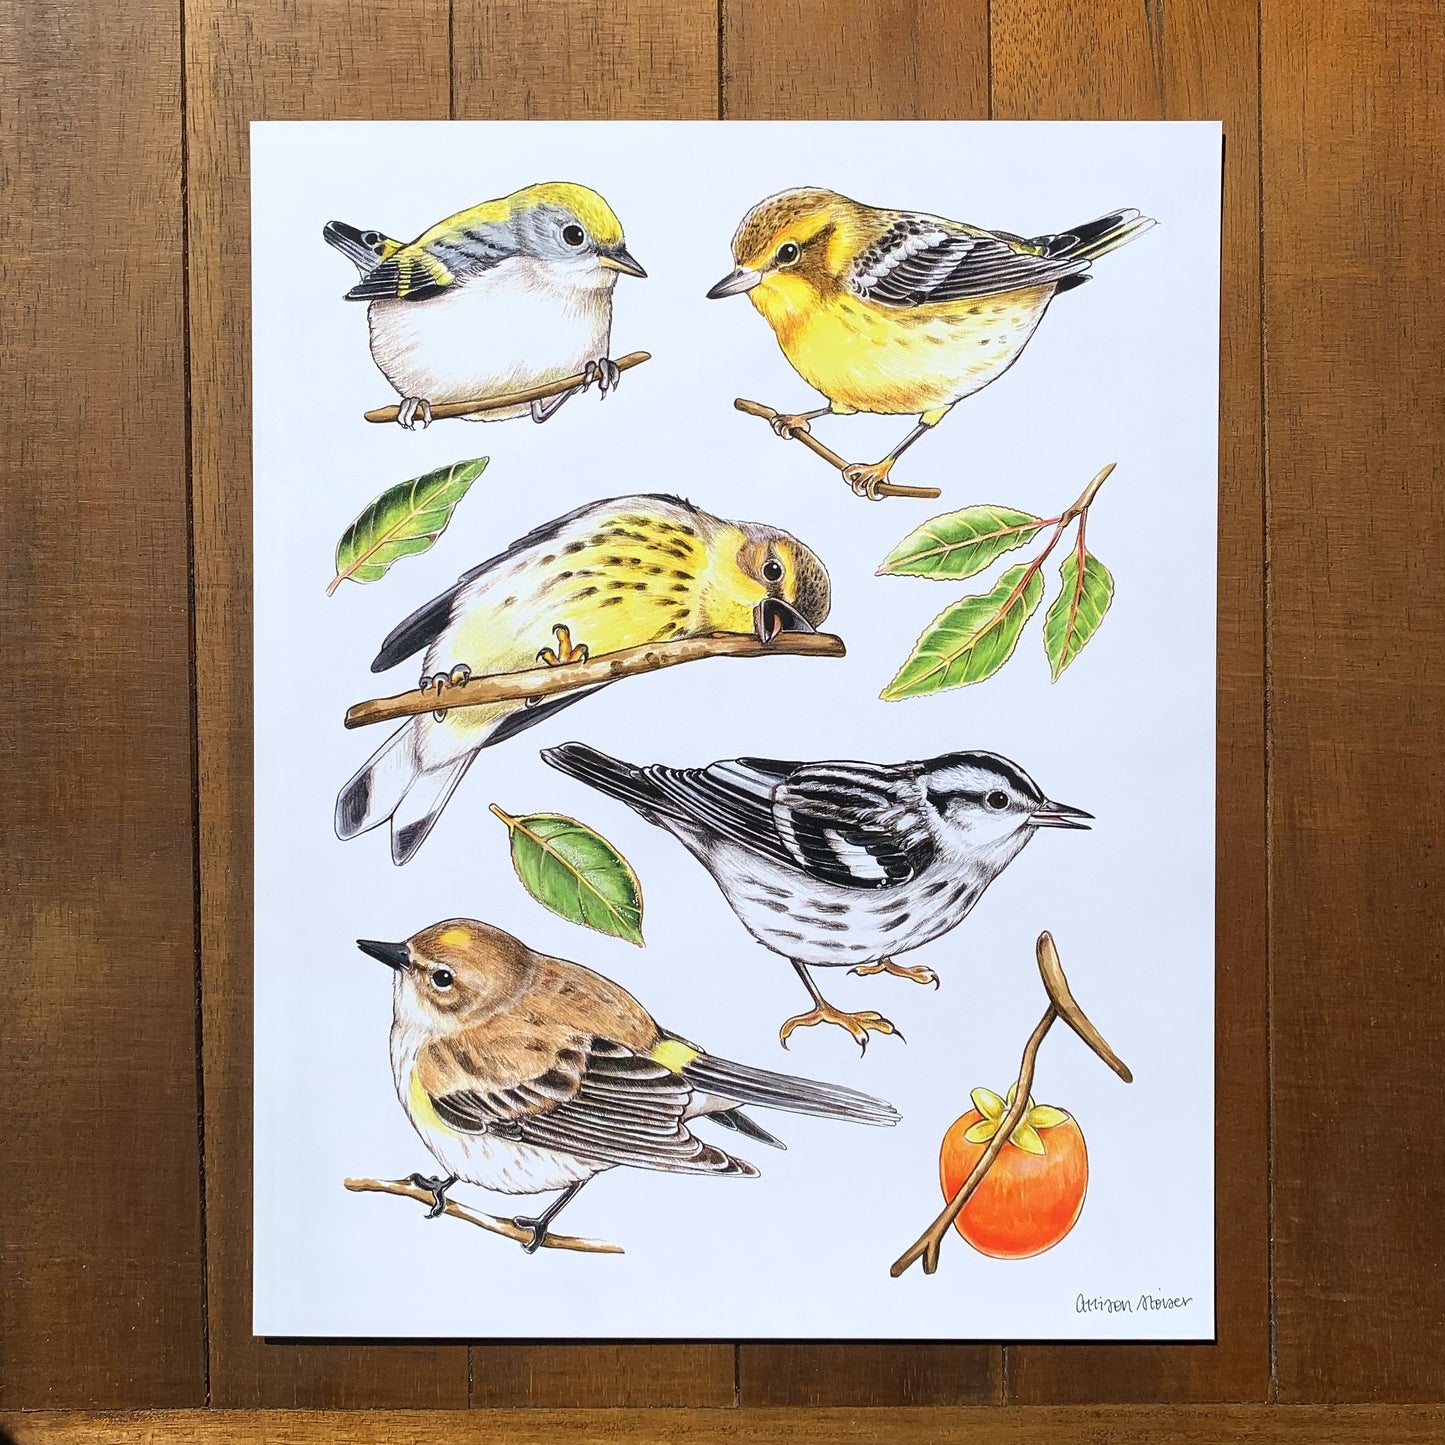 Warblers and Persimmon Print (8"x10")